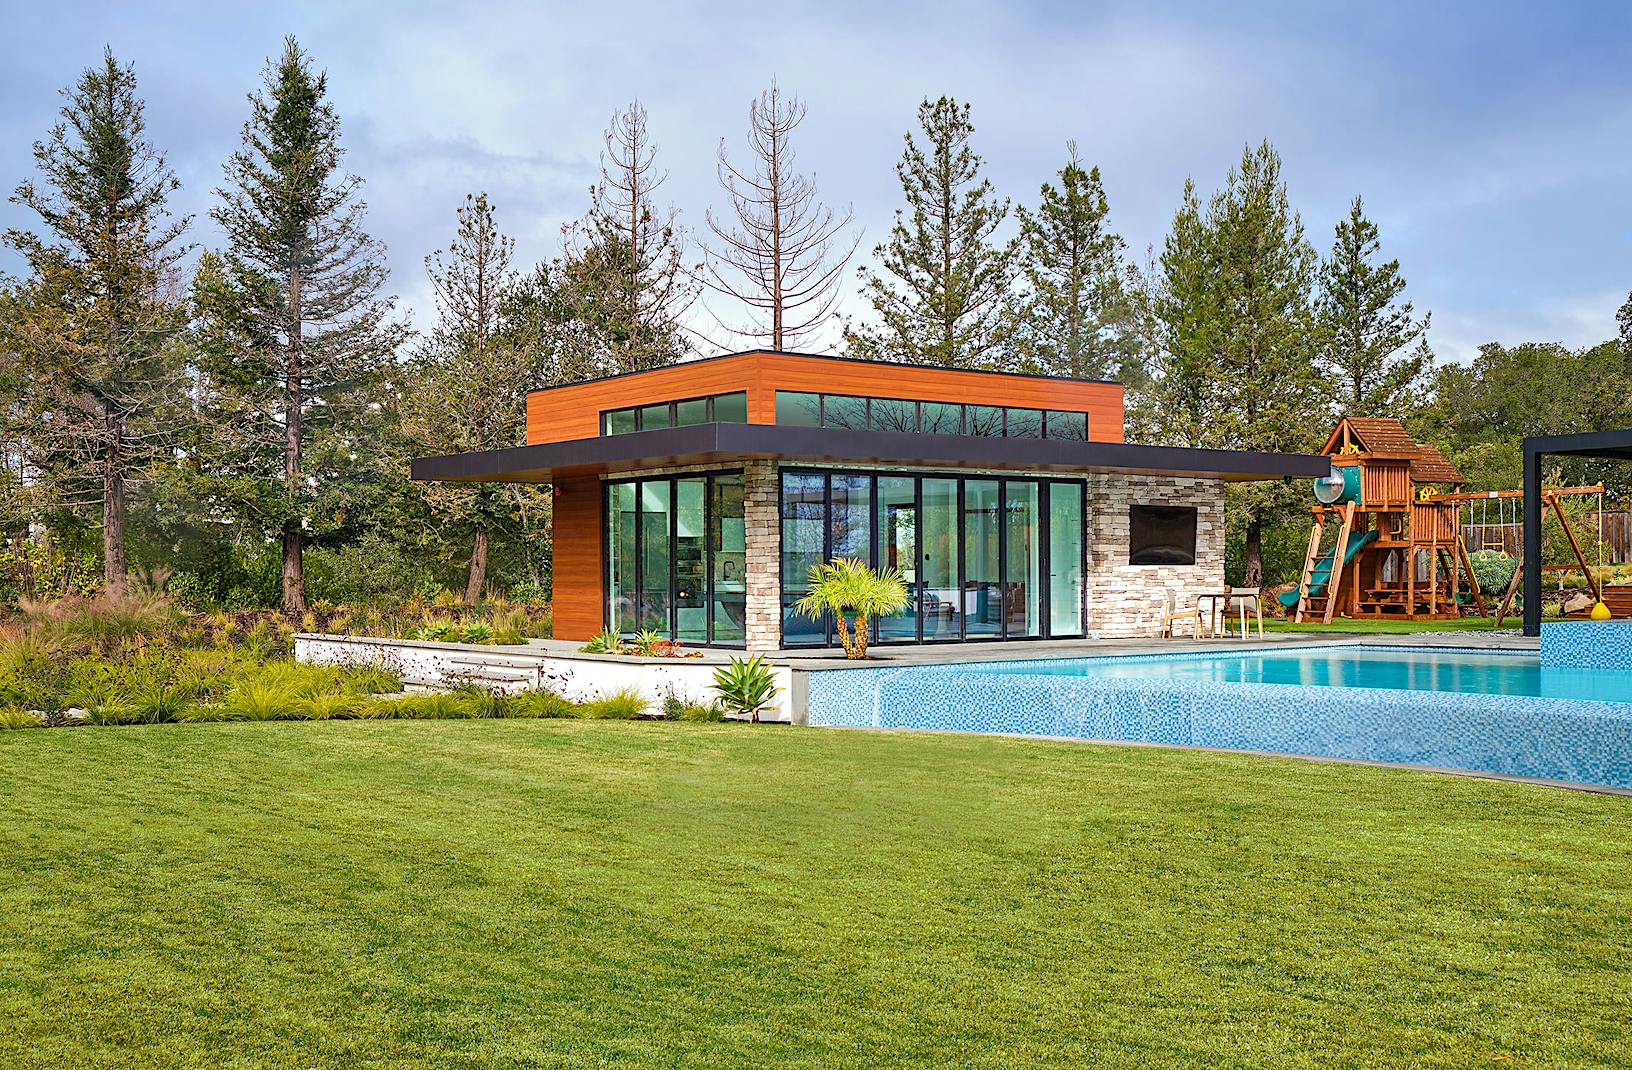 A house featuring a swimming pool and folding patio doors